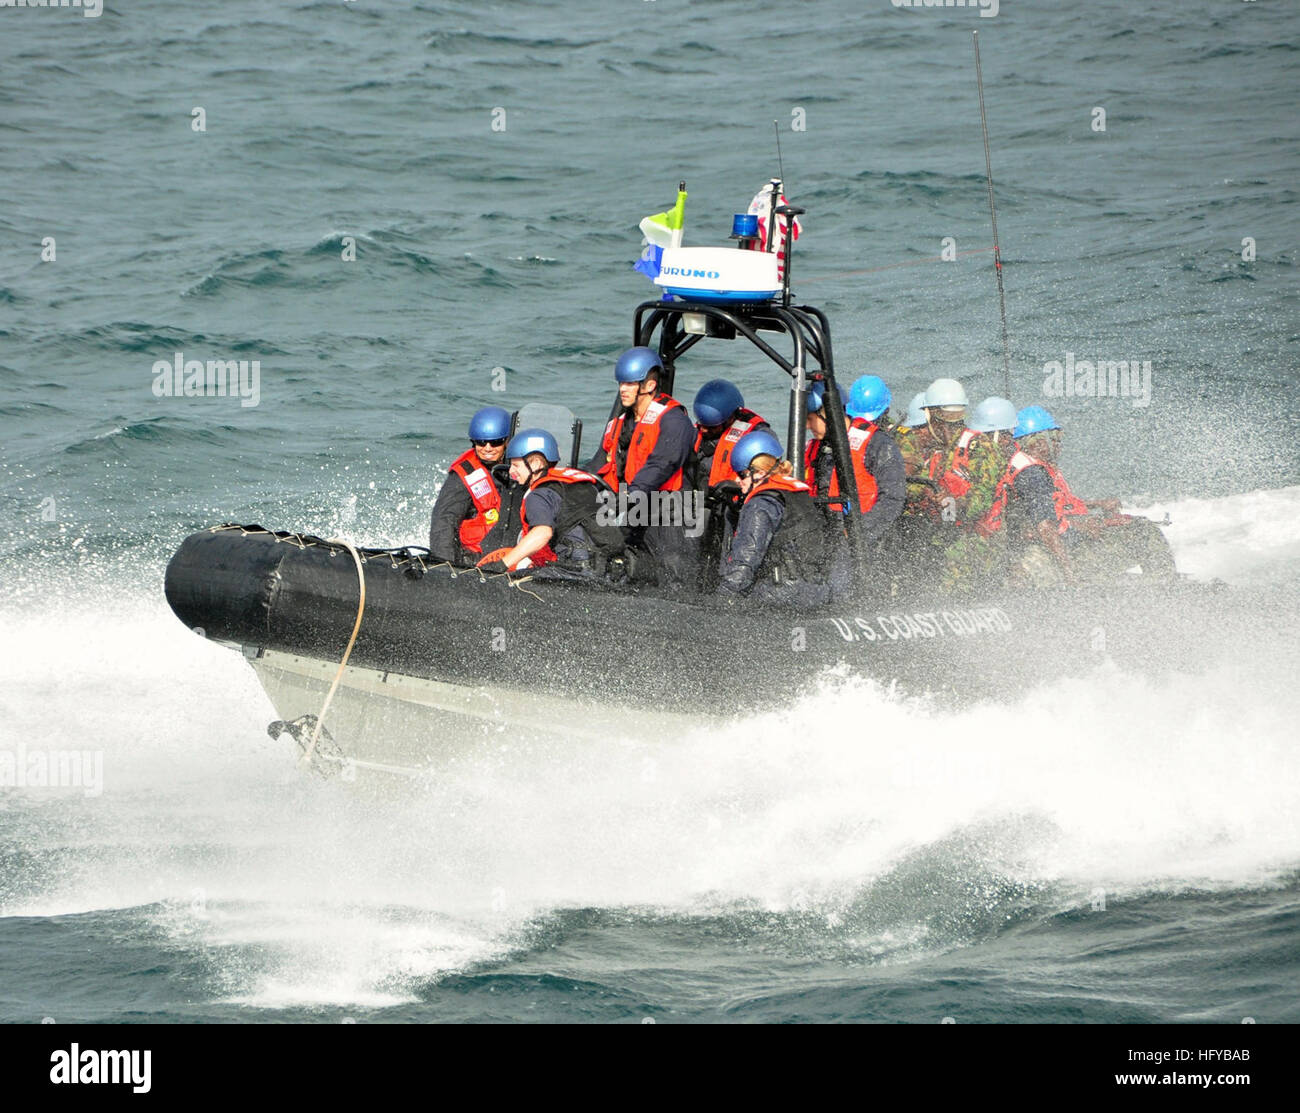 100730-N-3349L-026 GULF OF GUINEA (July 30, 2010) Members of a visit, board, search and seizure team assigned to the U.S. Coast Guard cutter Mohawk (WMEC 913), and a law enforcement detachment made up of members of the Sierra Leone Armed Forces, make their way toward Mohawk on an rigid-hull inflatable boat after conducting a search of two vessels suspected of conducting illegal activities. Mohawk recently participated in the African Maritime Law Enforcement Partnership. (U.S. Navy photo by Mass Communication Specialist 1st Class Daniel P. Lapierre/Released) US Navy 100730-N-3349L-026 U.S. Coas Stock Photo